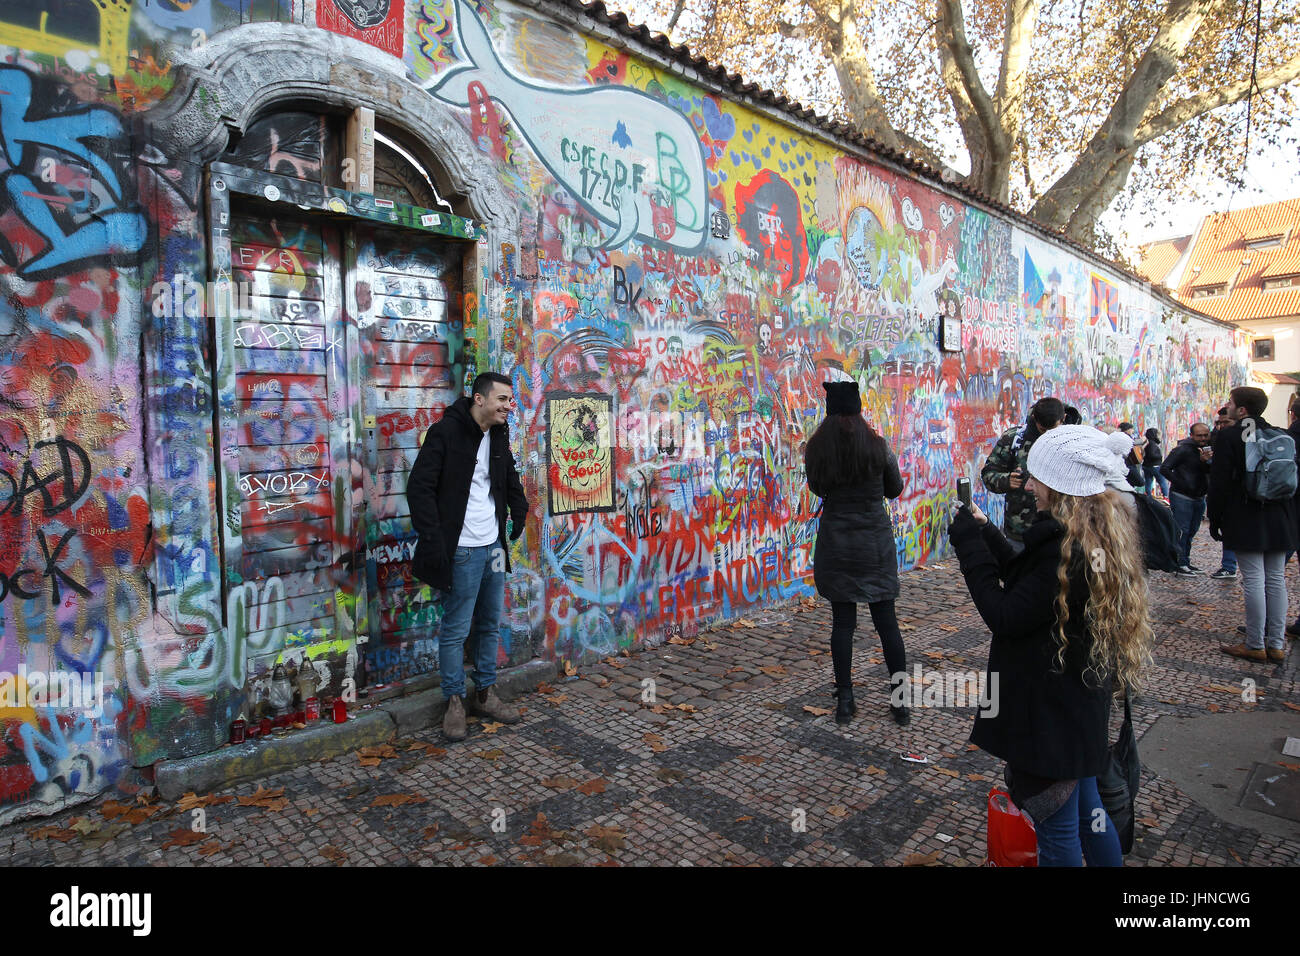 The John Lennon wall is graffiti filled wall in Prague, the Czech Republic. the wall represents a symbol of global ideals such as love and peace. Stock Photo